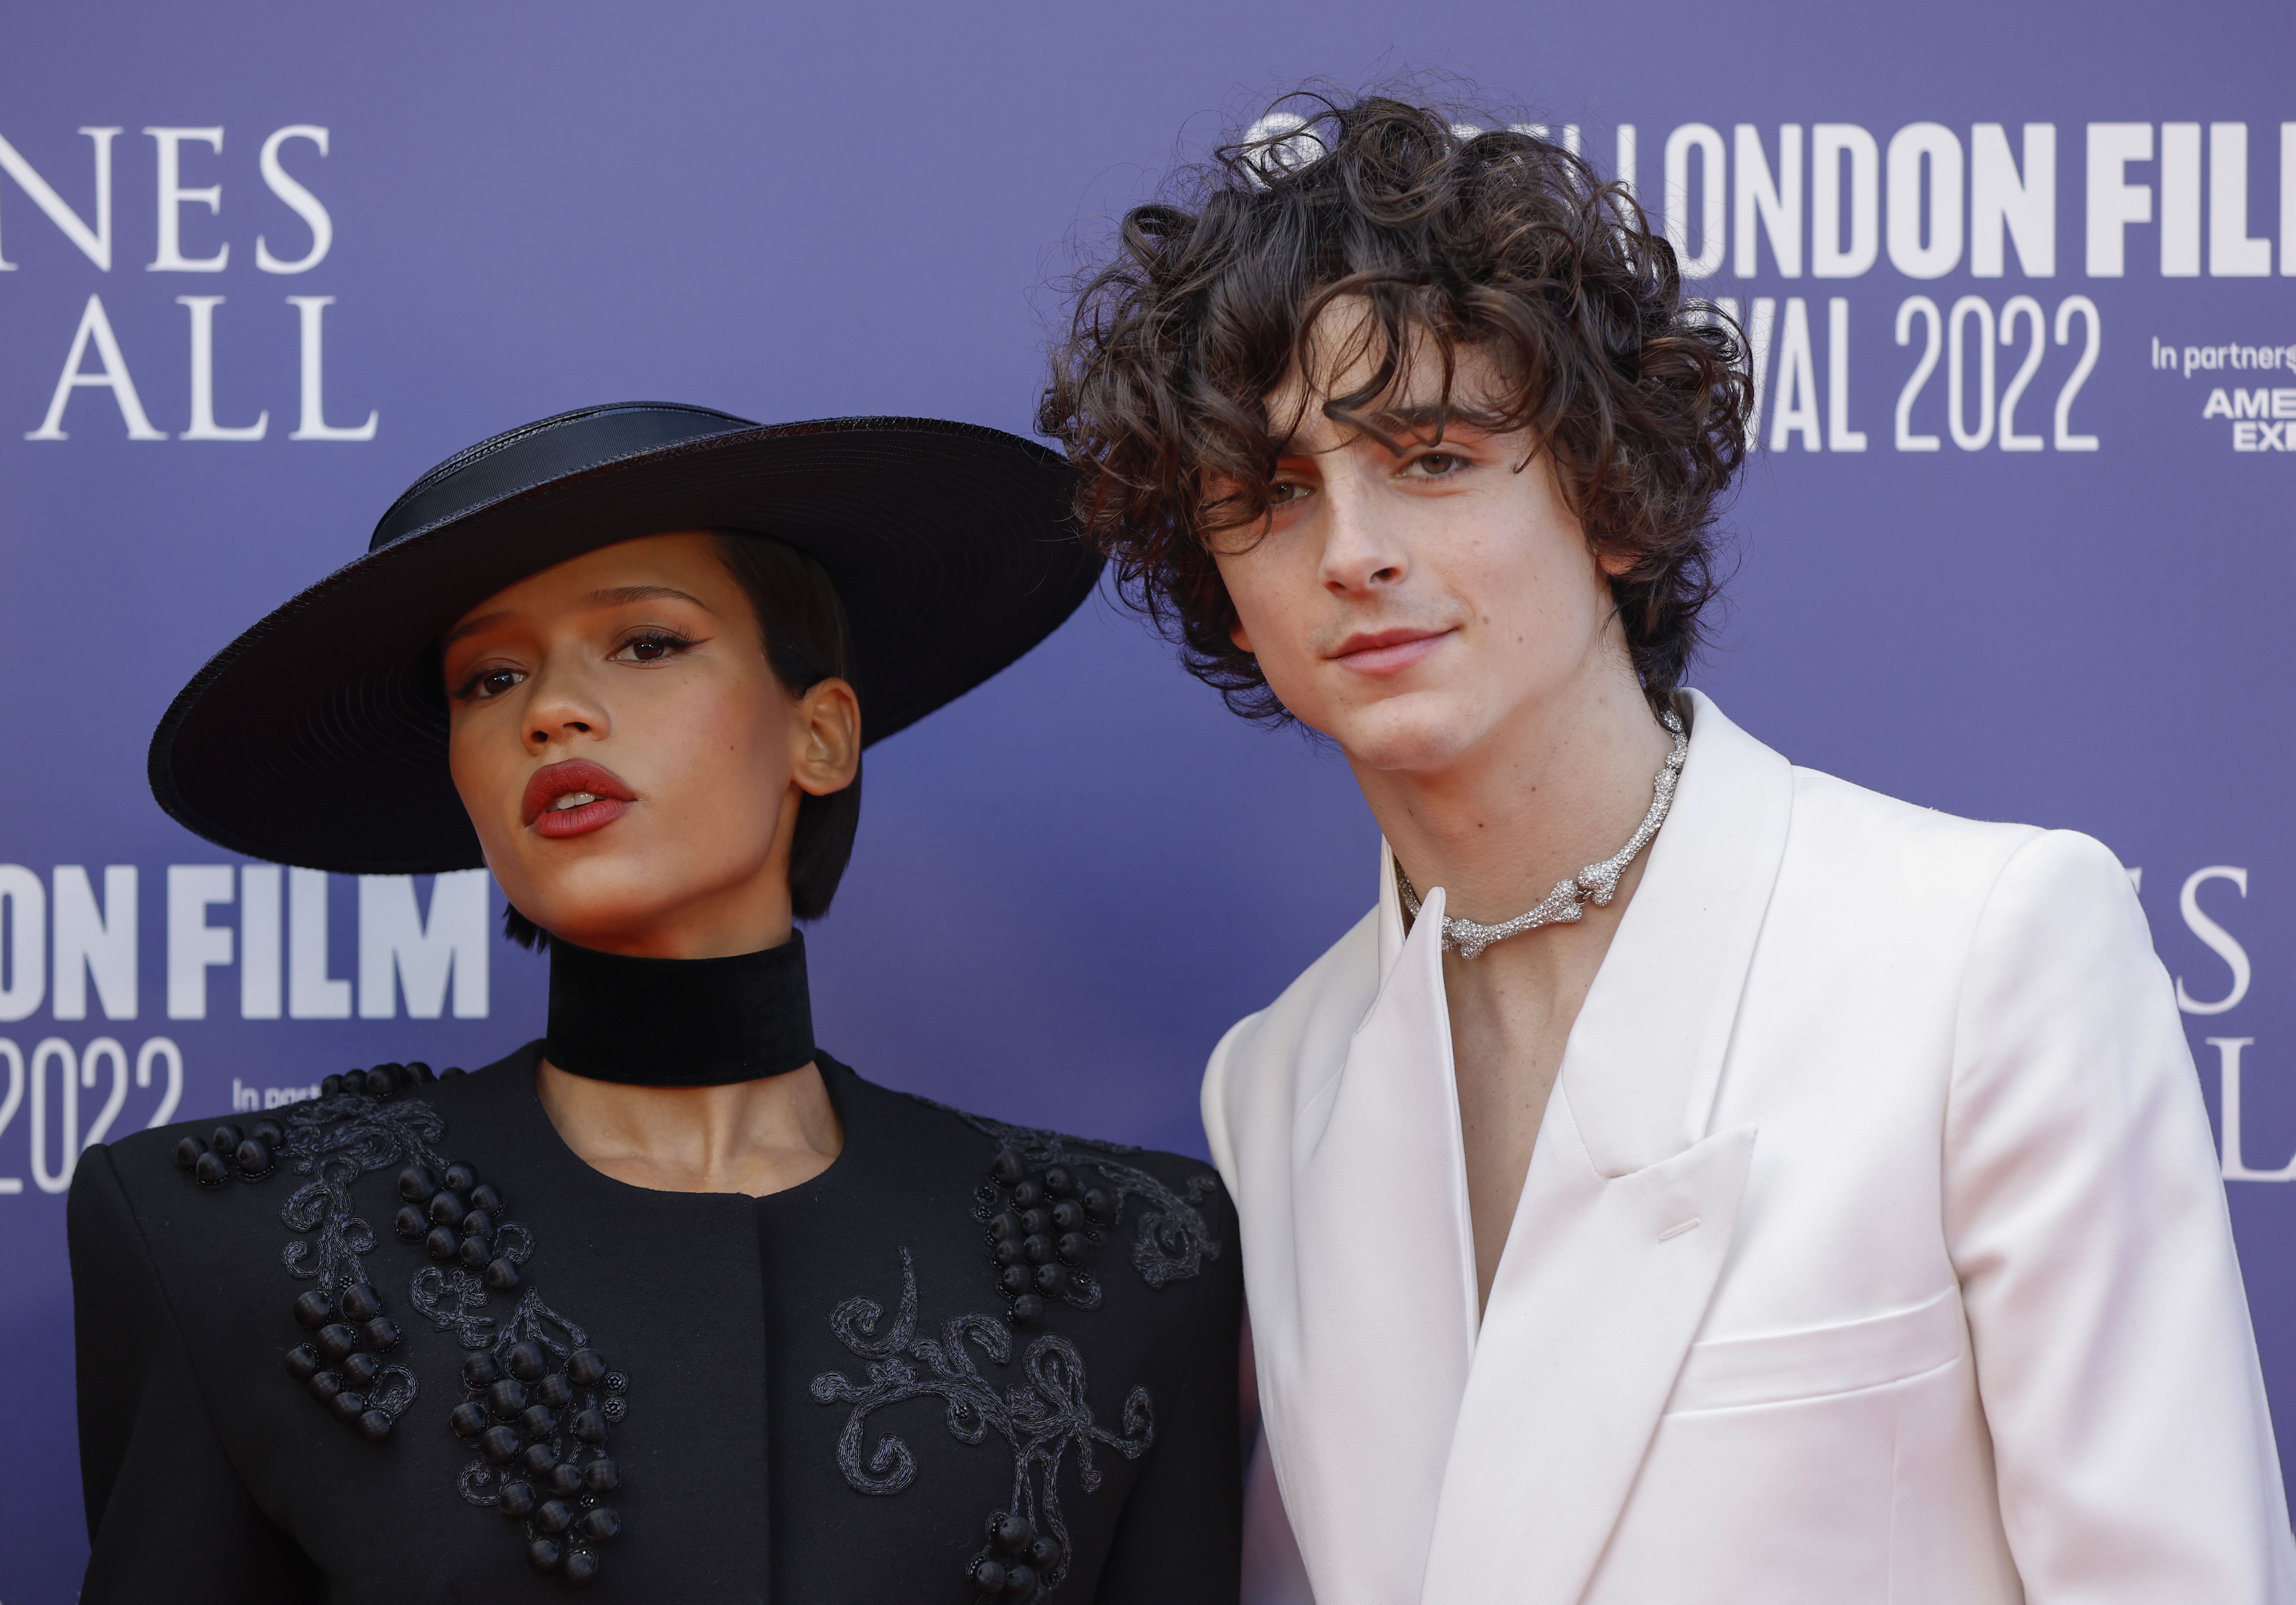 Timothée Chalamet and Taylor Russell Make a Stellar Red-Carpet Duo